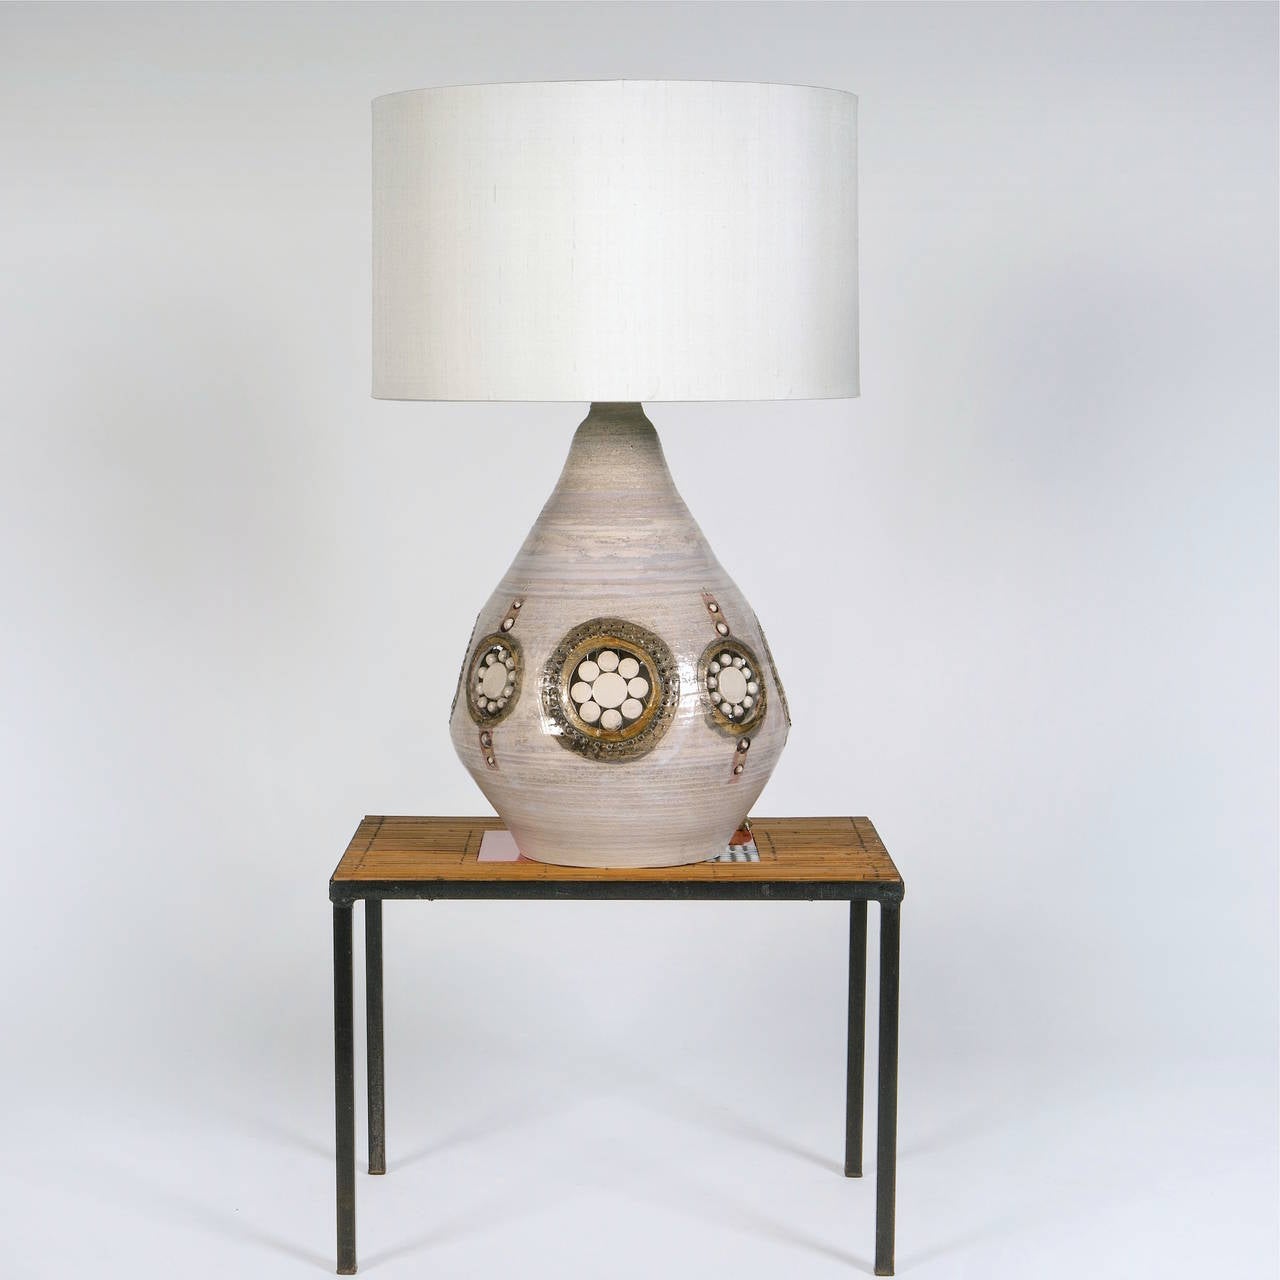 Important lamp base, grogged clay, shiny beige slightly pinkish ground glaze and decorated with stylized perforations and glazed ceramic pearls and pastilles. 
Irradiant light two ways inside the lamp-base and up. 

A beautiful pottery piece modeled